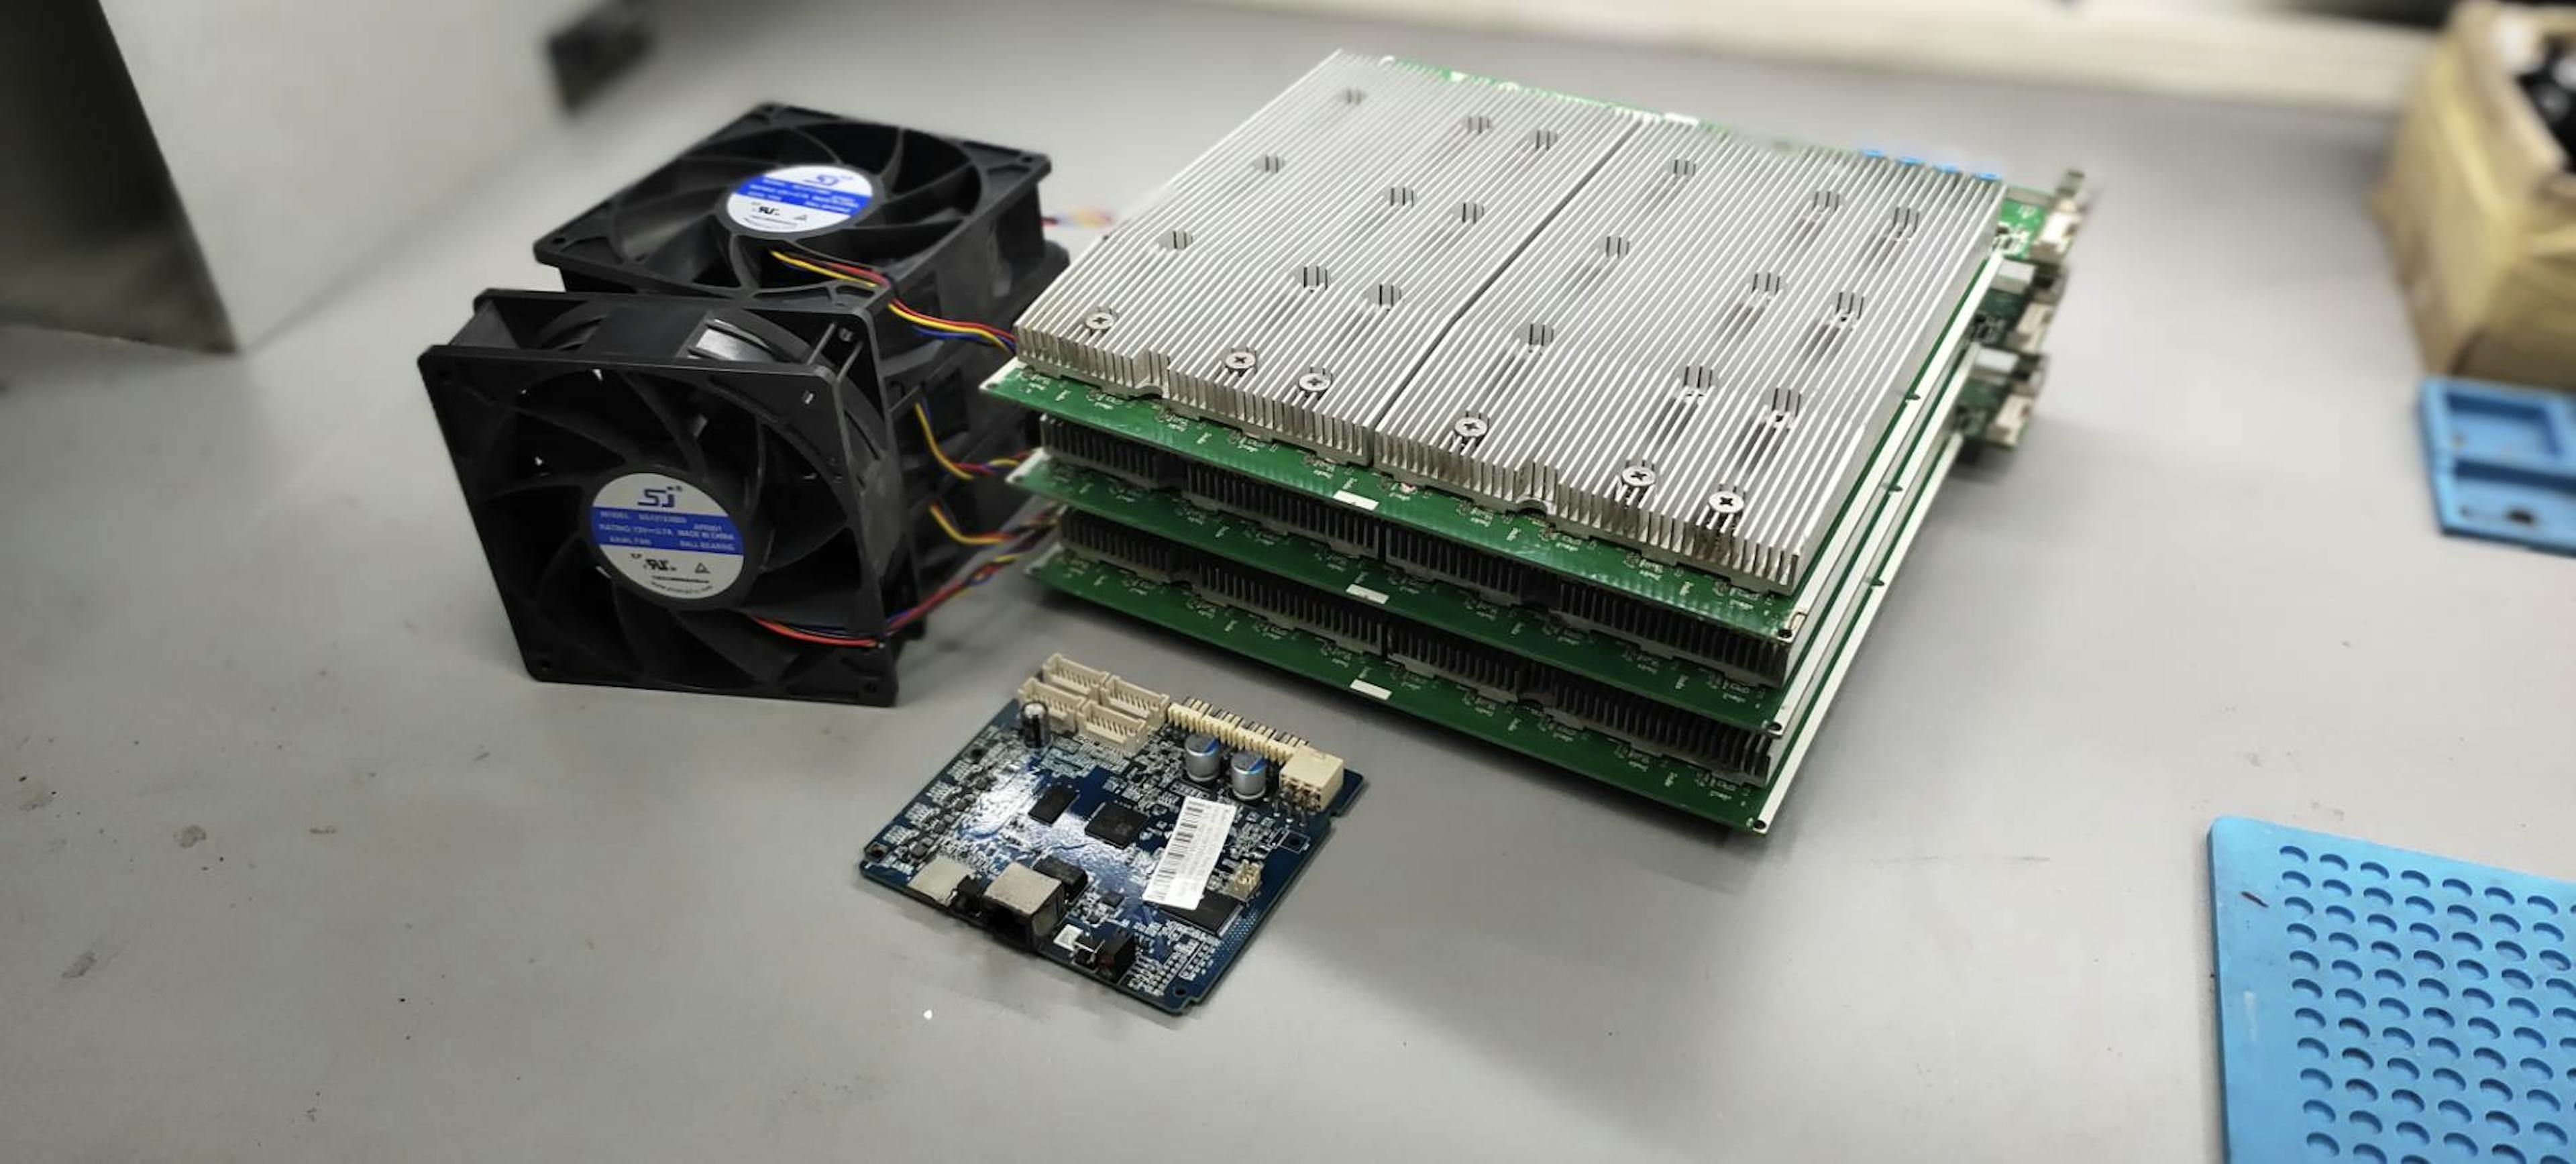 Component of ASIC miner from BITMAIN model ANTMINER s19